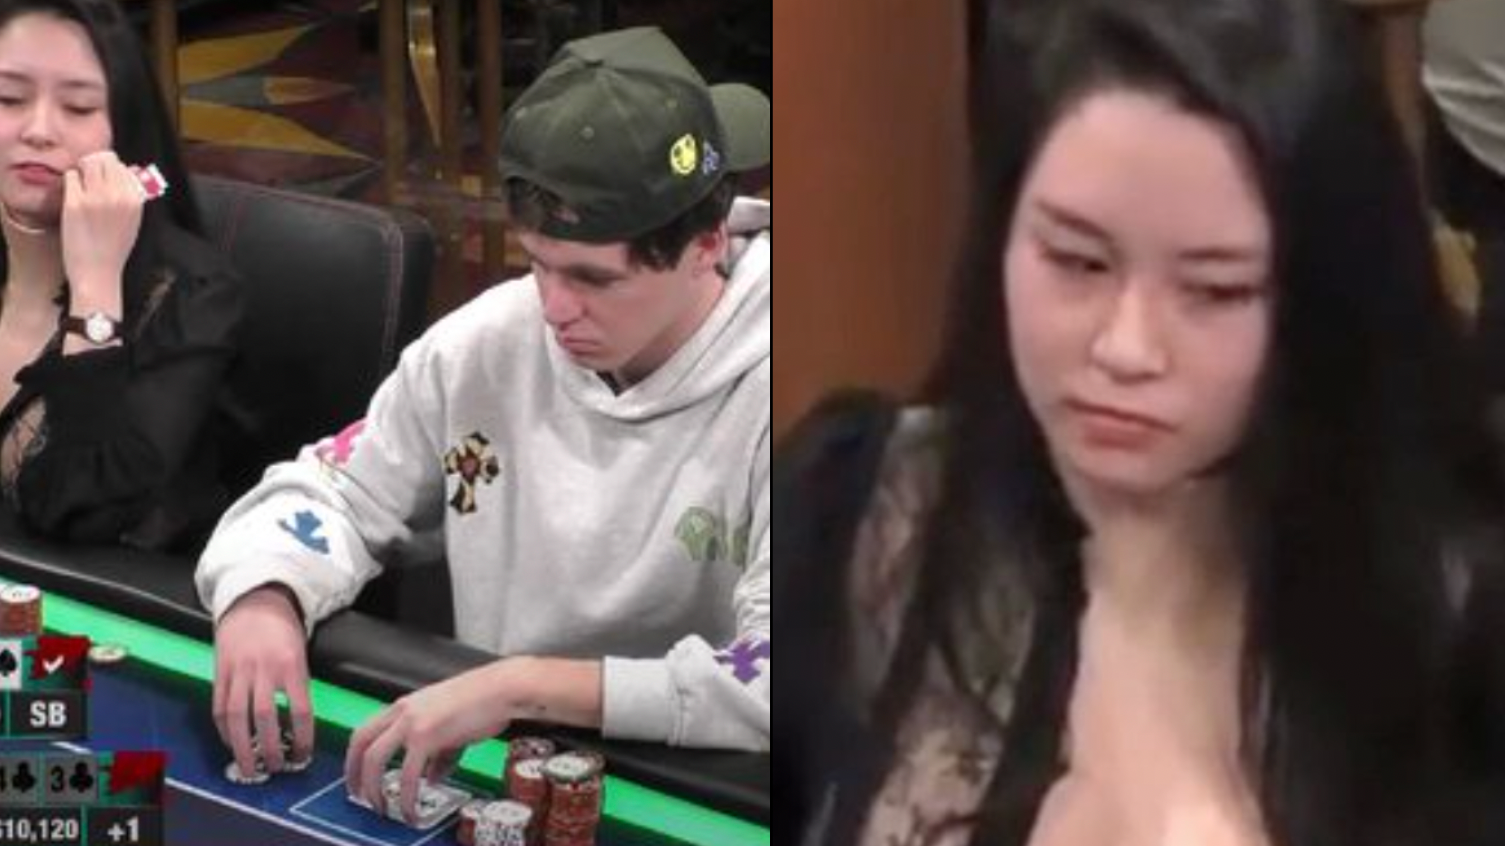 Poker tournament hit by fake boobs nip slip controversy just weeks after vibrator cheat scandal image image